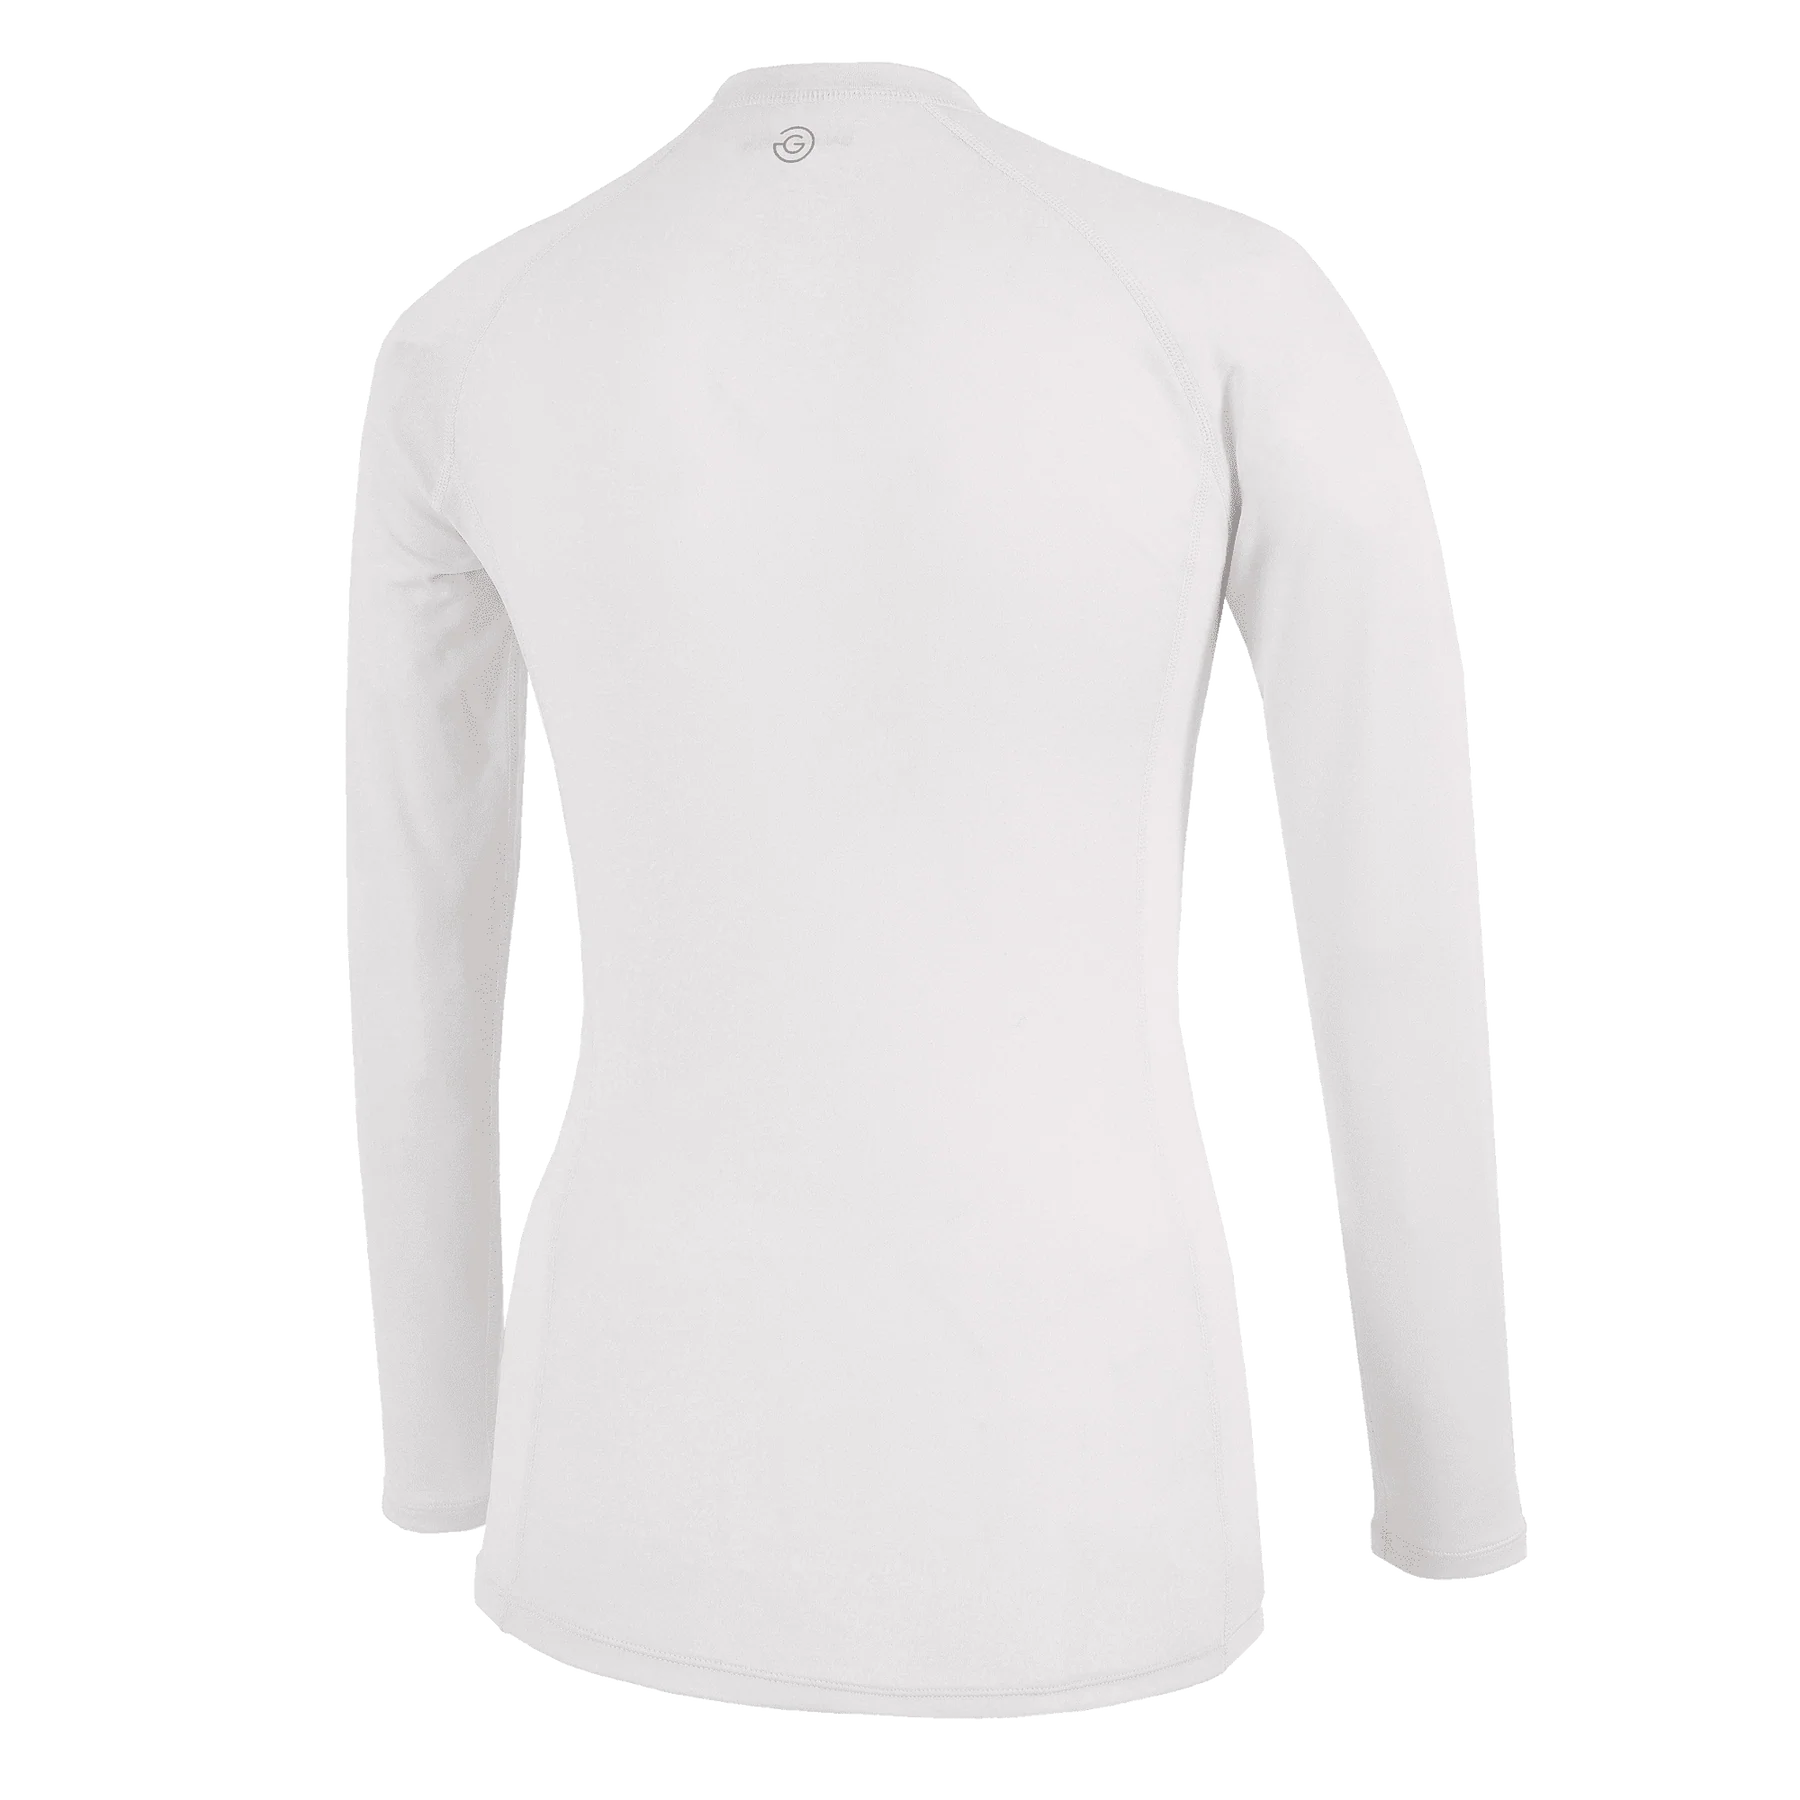 GALVIN GREEN WOMEN'S ELAINE THERMAL BASE LAYER TOP